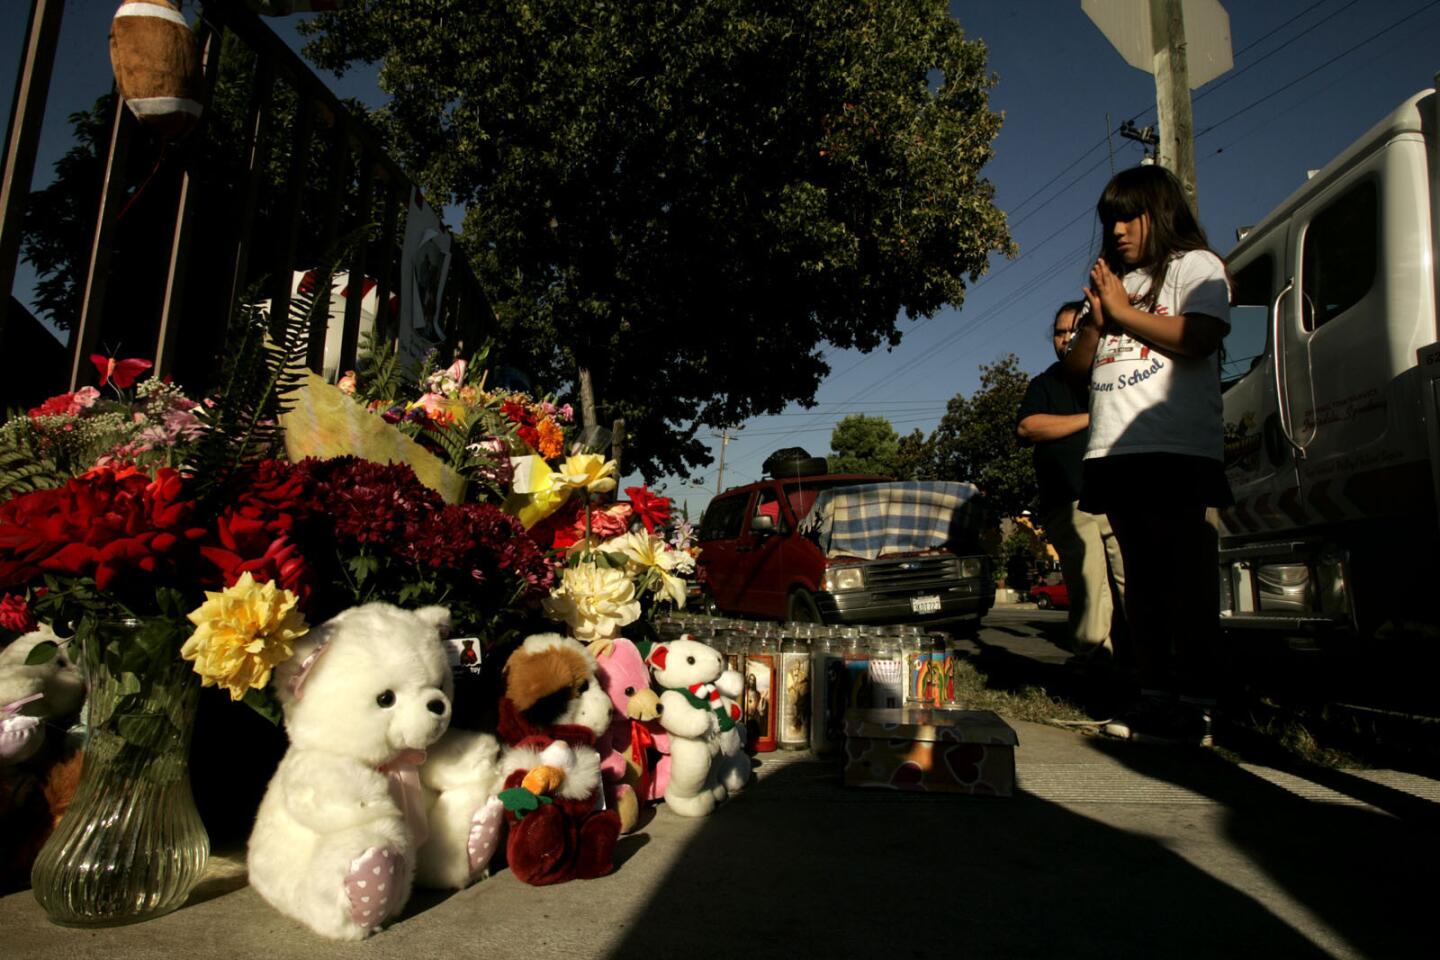 Yasmine Lizalde, 8, prays over a makeshift memorial for Dora Groce and her children Catherine, 4, and Robert, 8, who were killed in 2007 when their car was hit by a street racer at the corner of Parkway Drive and Elliott Avenue. Yasmine went to school with Robert.